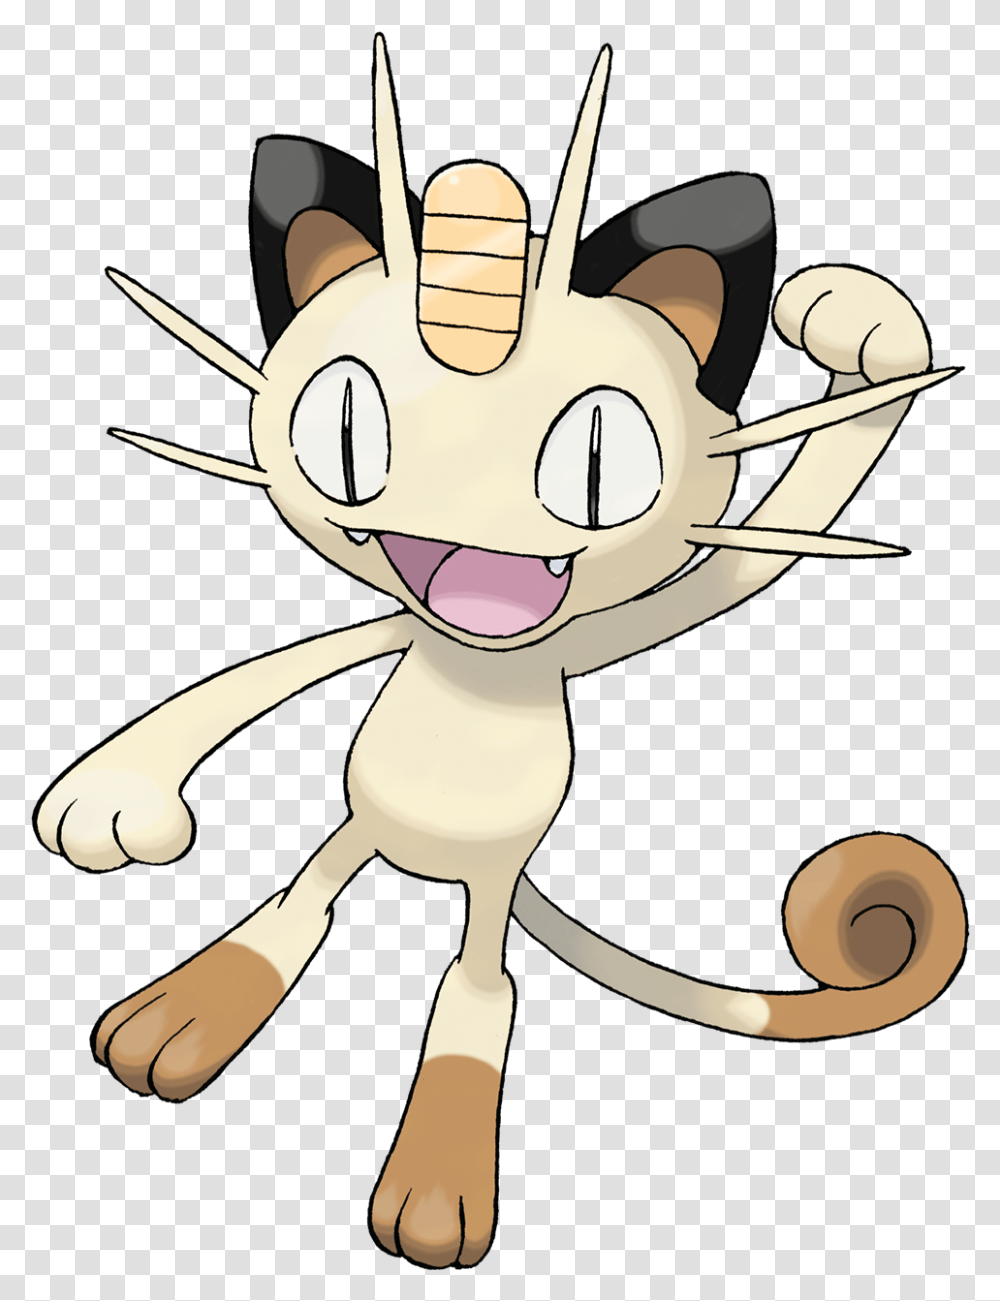 Meowth Pokemon Meowth, Animal, Insect, Invertebrate, Rattle Transparent Png